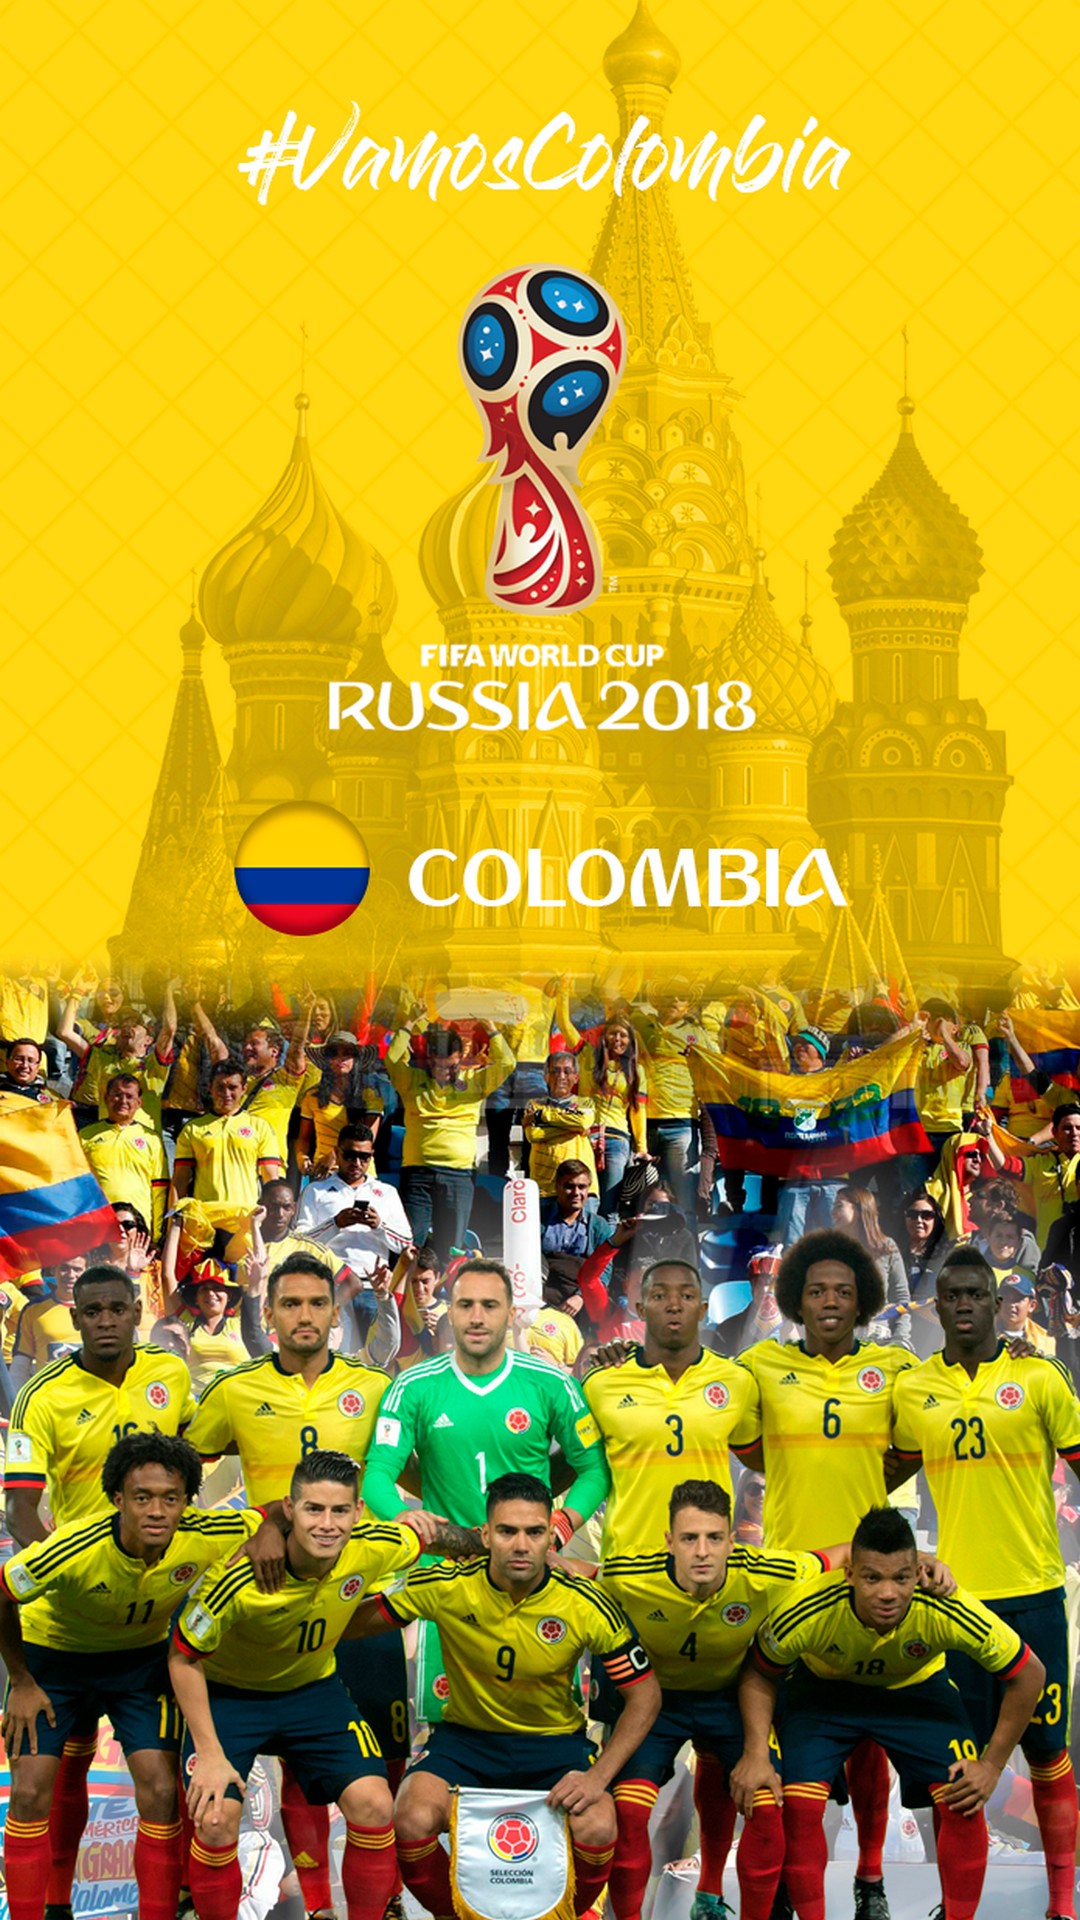 Colombia National Team HD Wallpaper For iPhone With Resolution 1080X1920 pixel. You can make this wallpaper for your Mac or Windows Desktop Background, iPhone, Android or Tablet and another Smartphone device for free